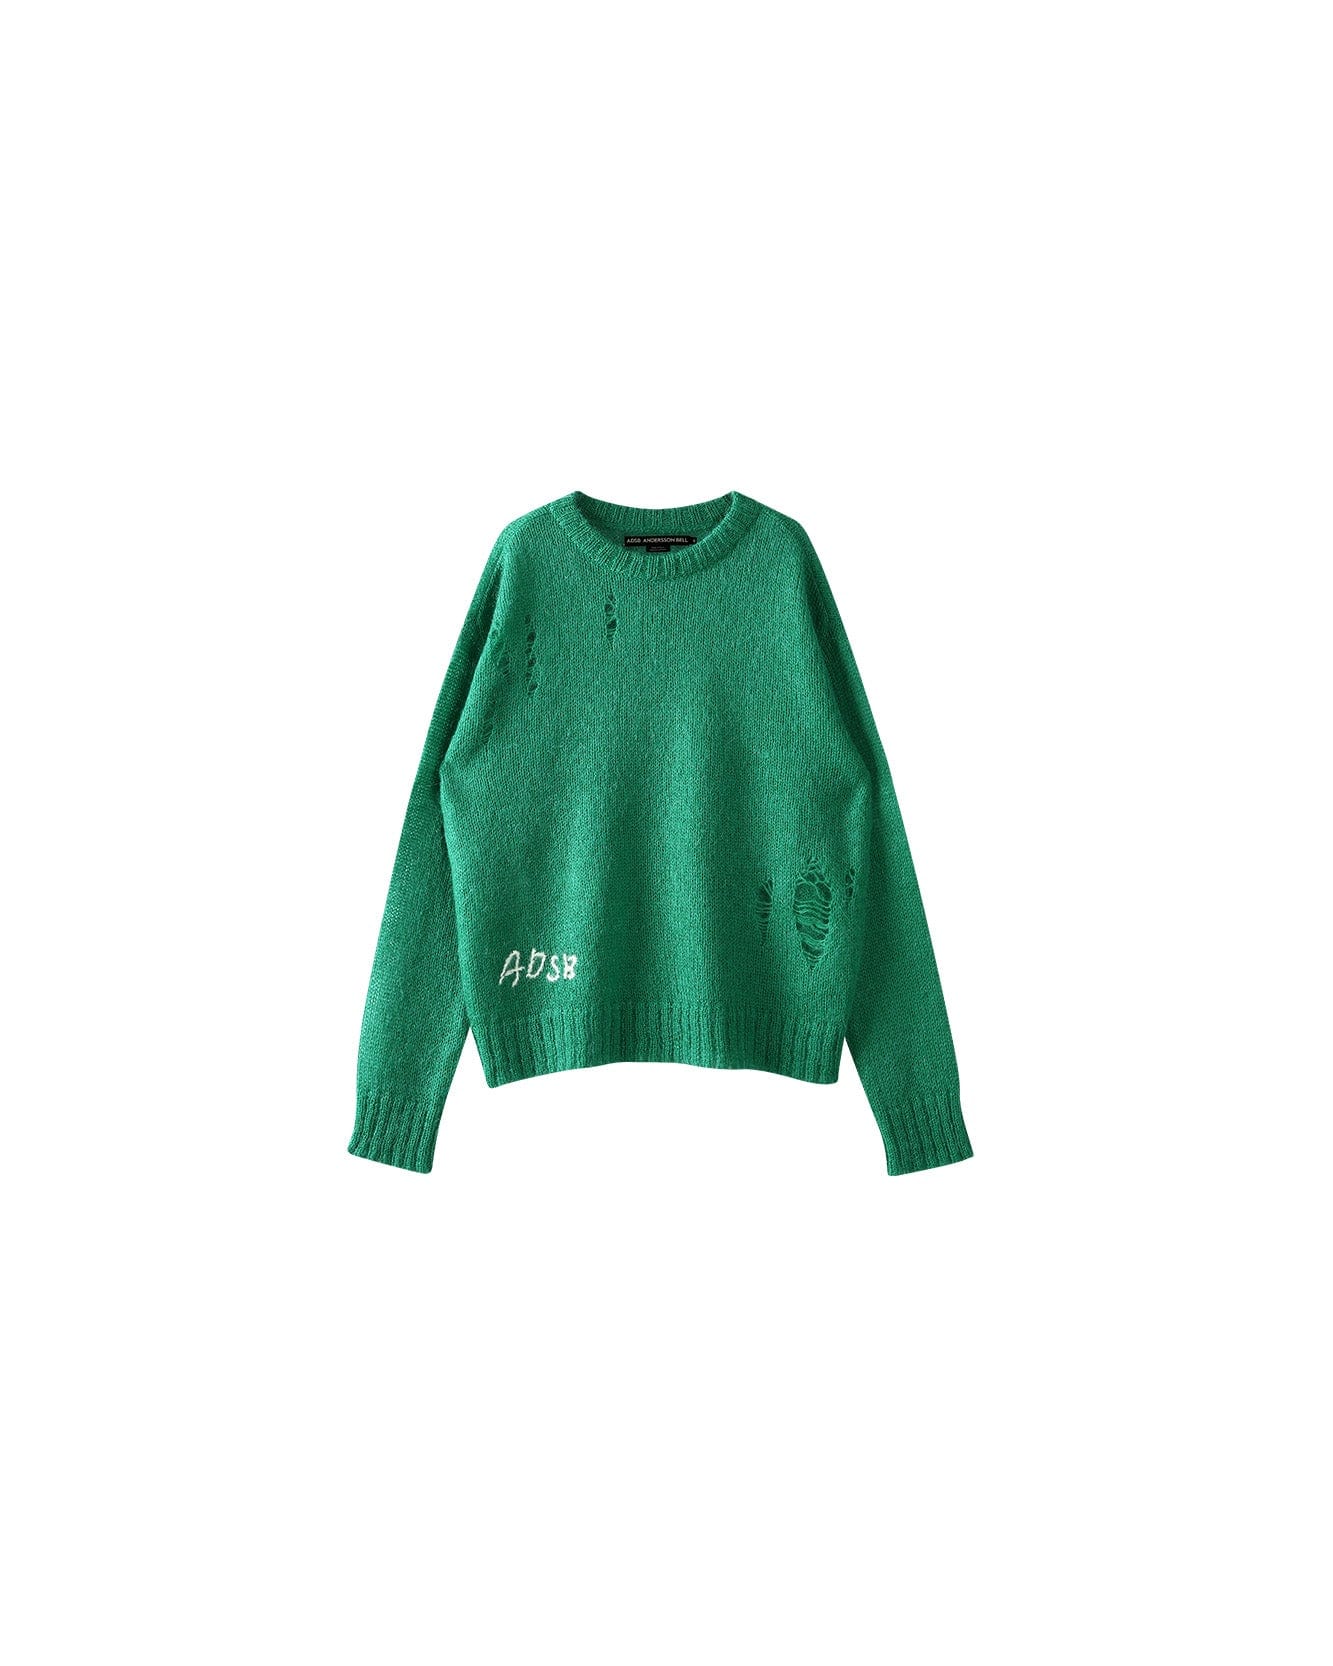 (ESSENTIAL) ADSB KID MOHAIR CREW-NECK SWEATER atb1038m(GREEN)